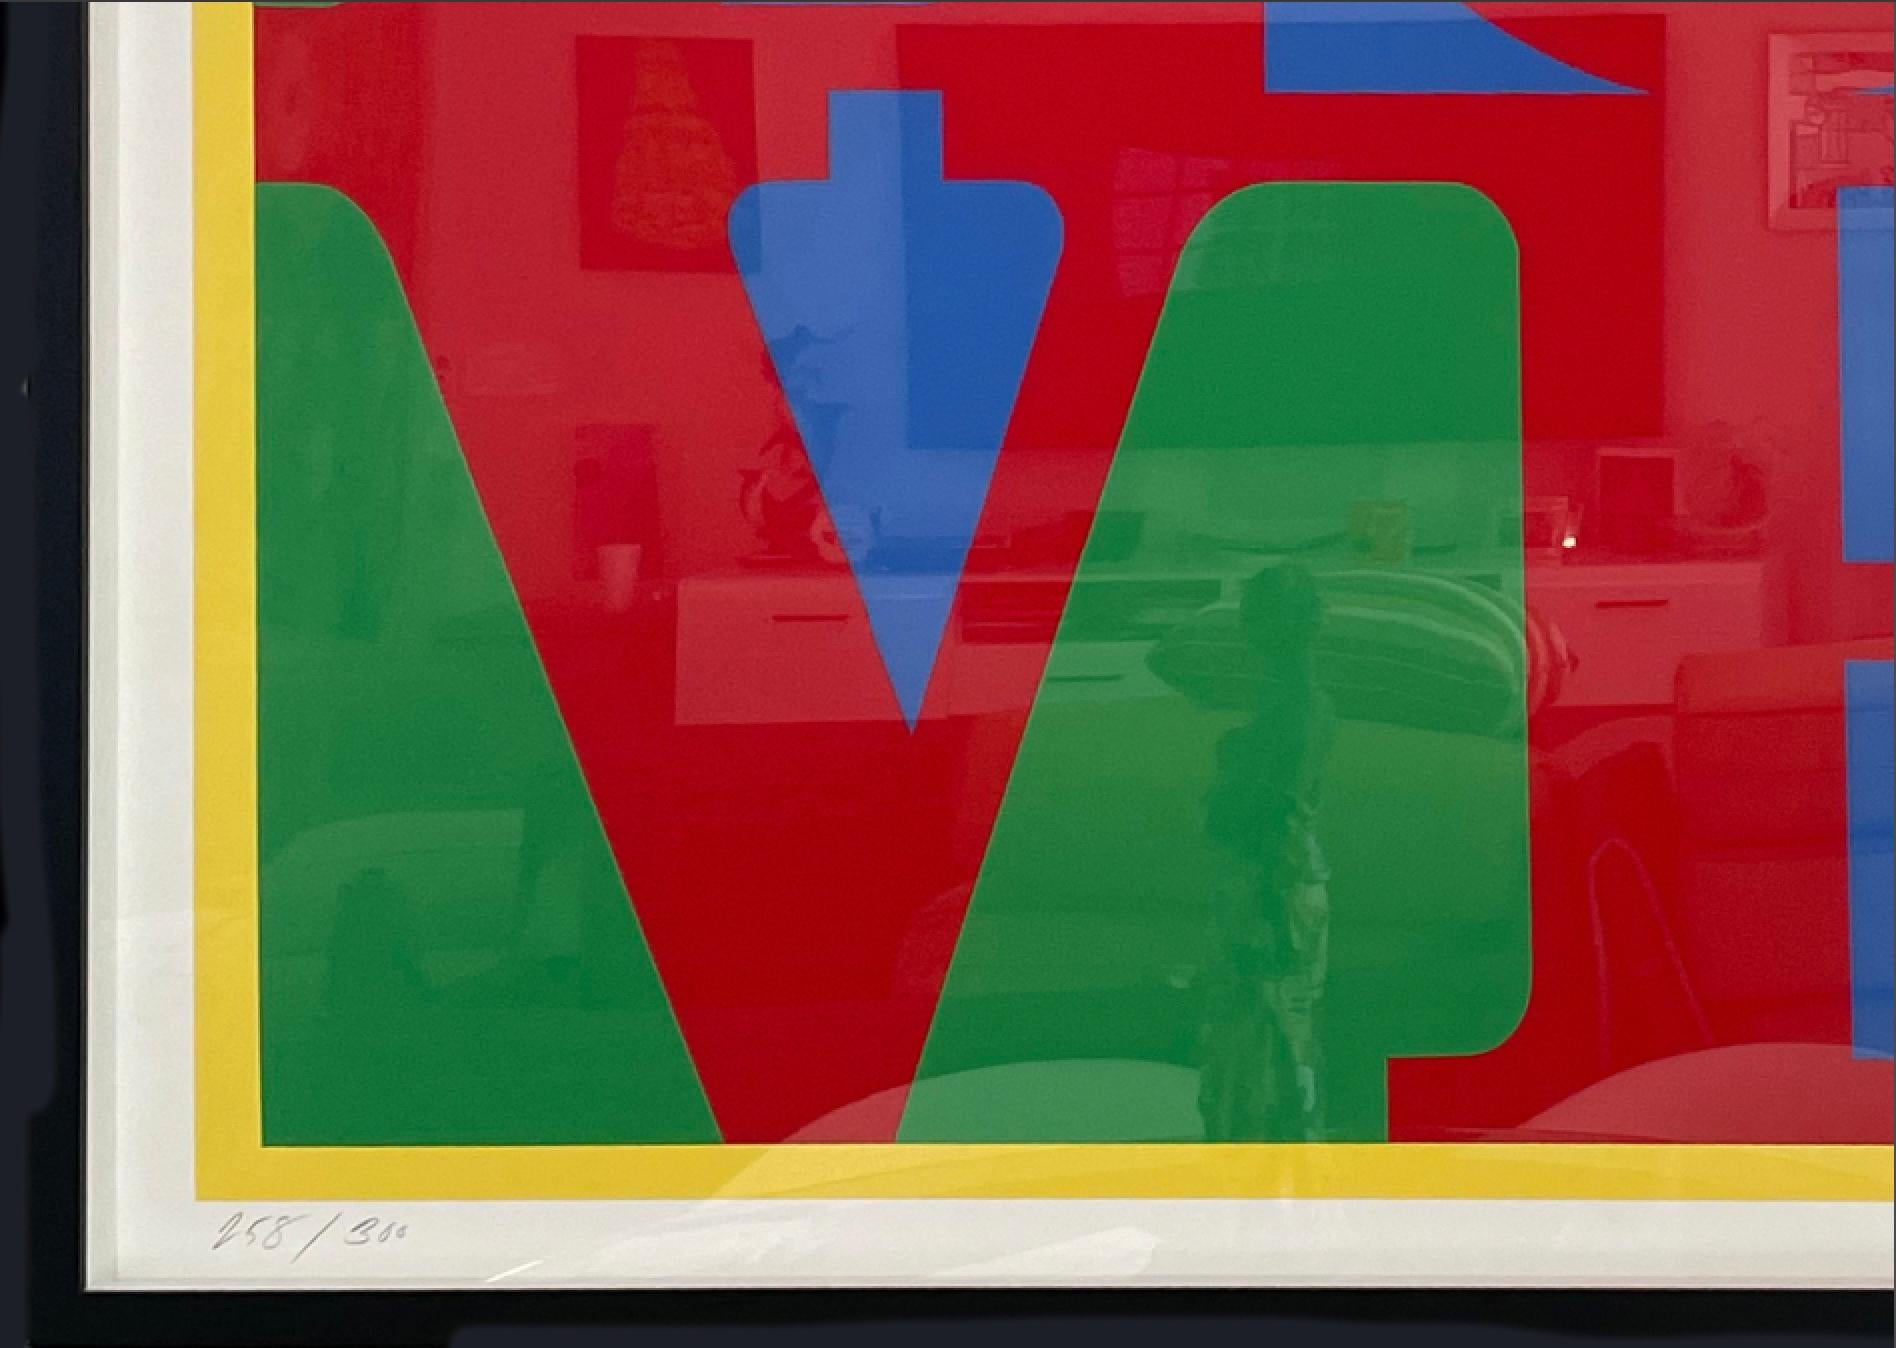 Heliotherapy Love - Pop Art Print by Robert Indiana